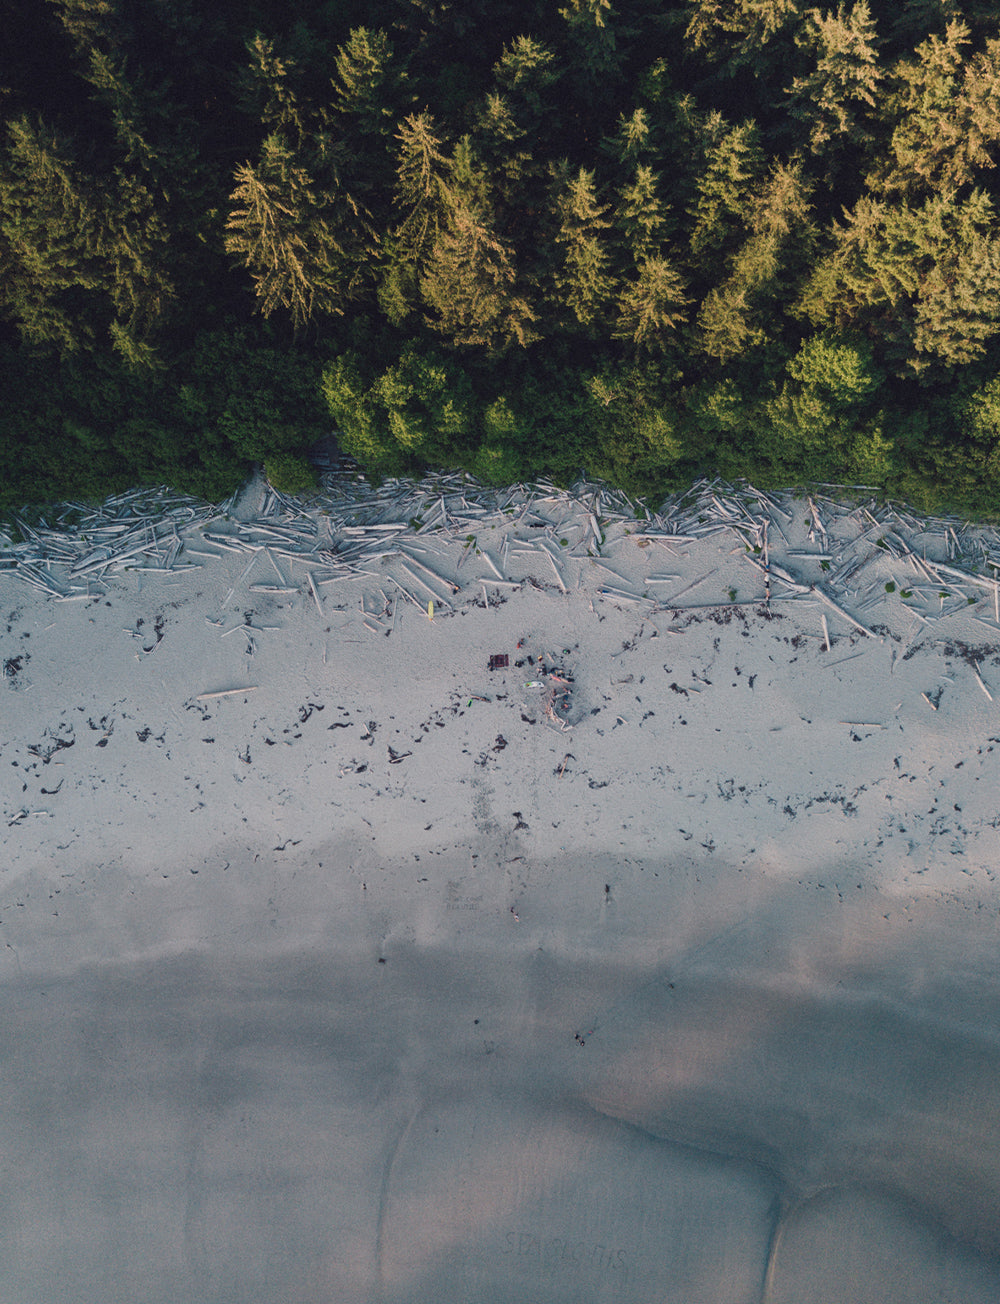 An aerial view of a beach with driftwood and dense trees